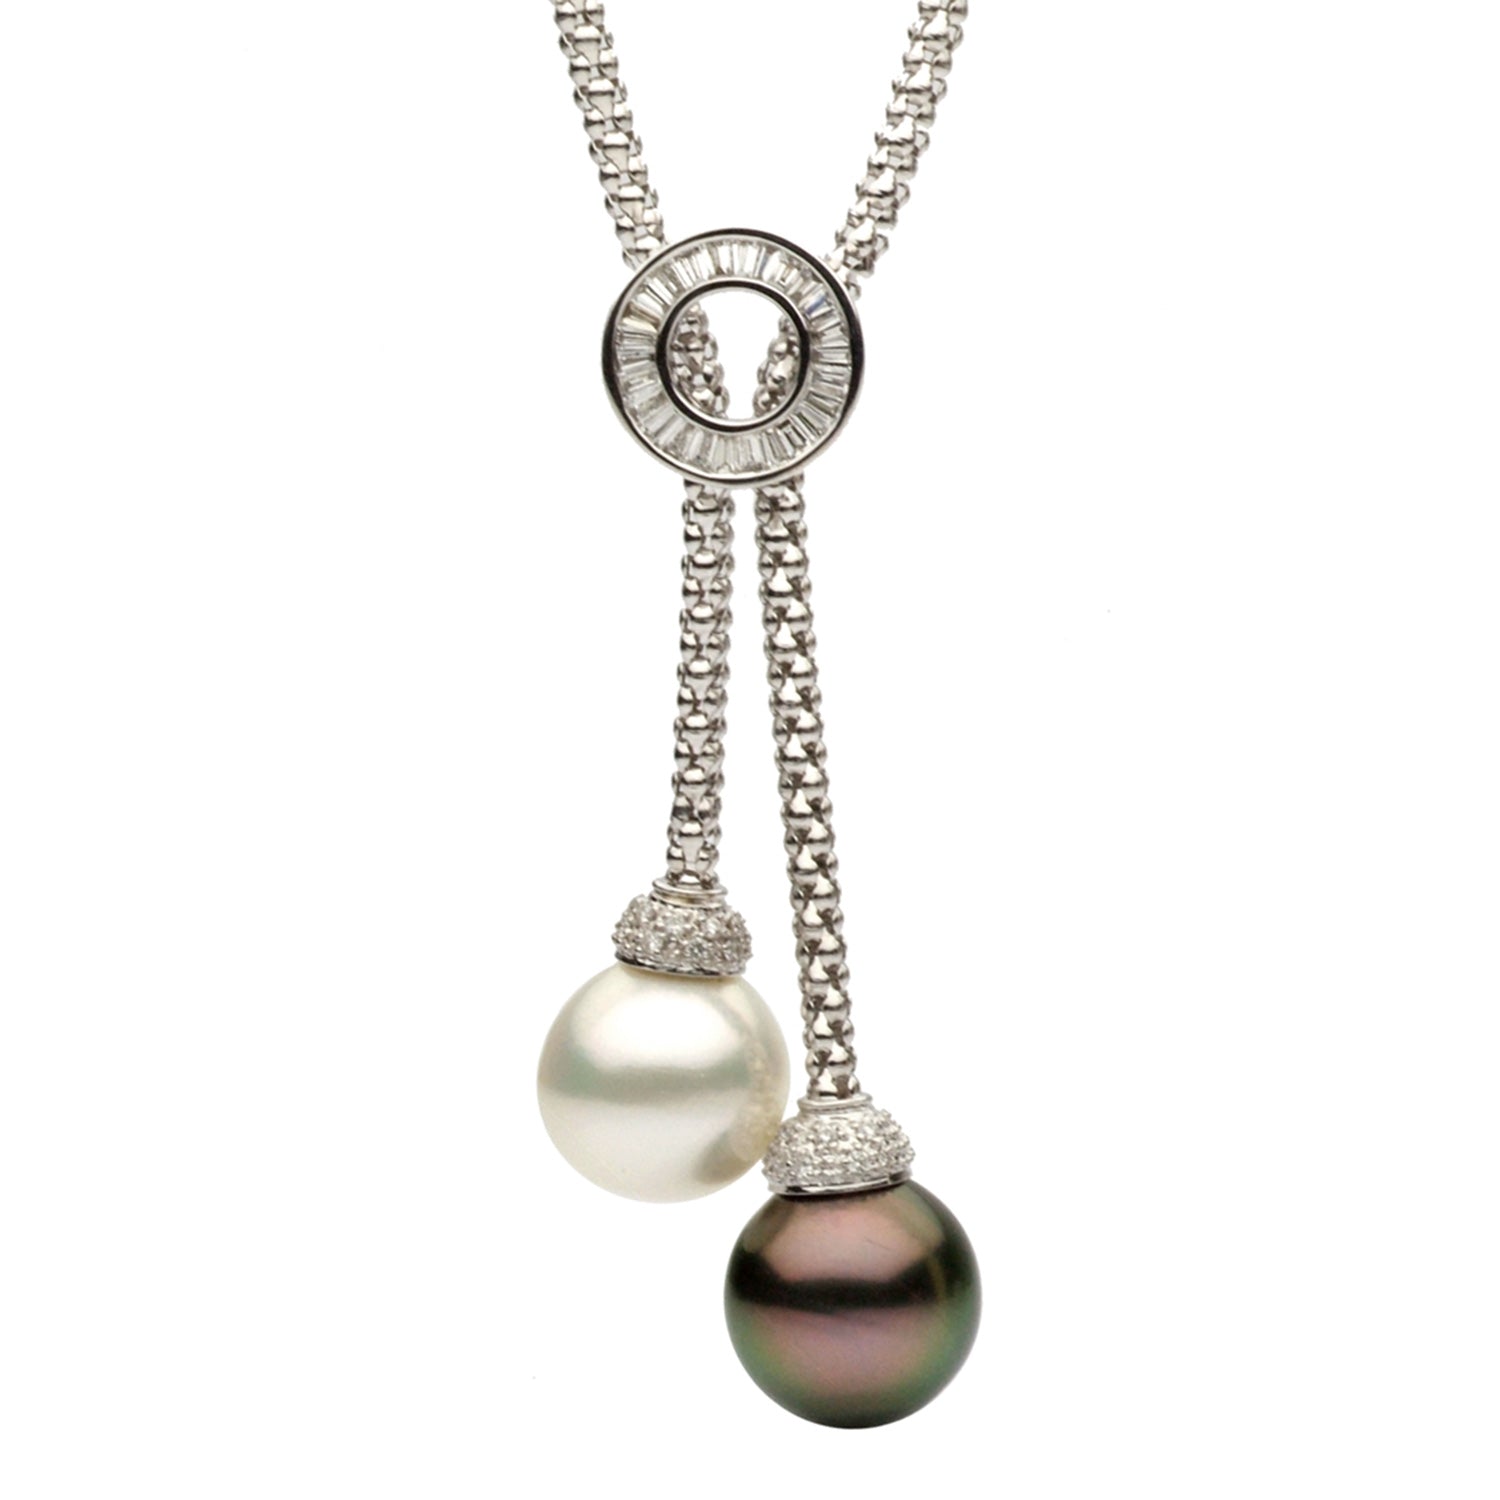 18KW White South Sea & Tahitian Pearl Necklace, 12-13mm